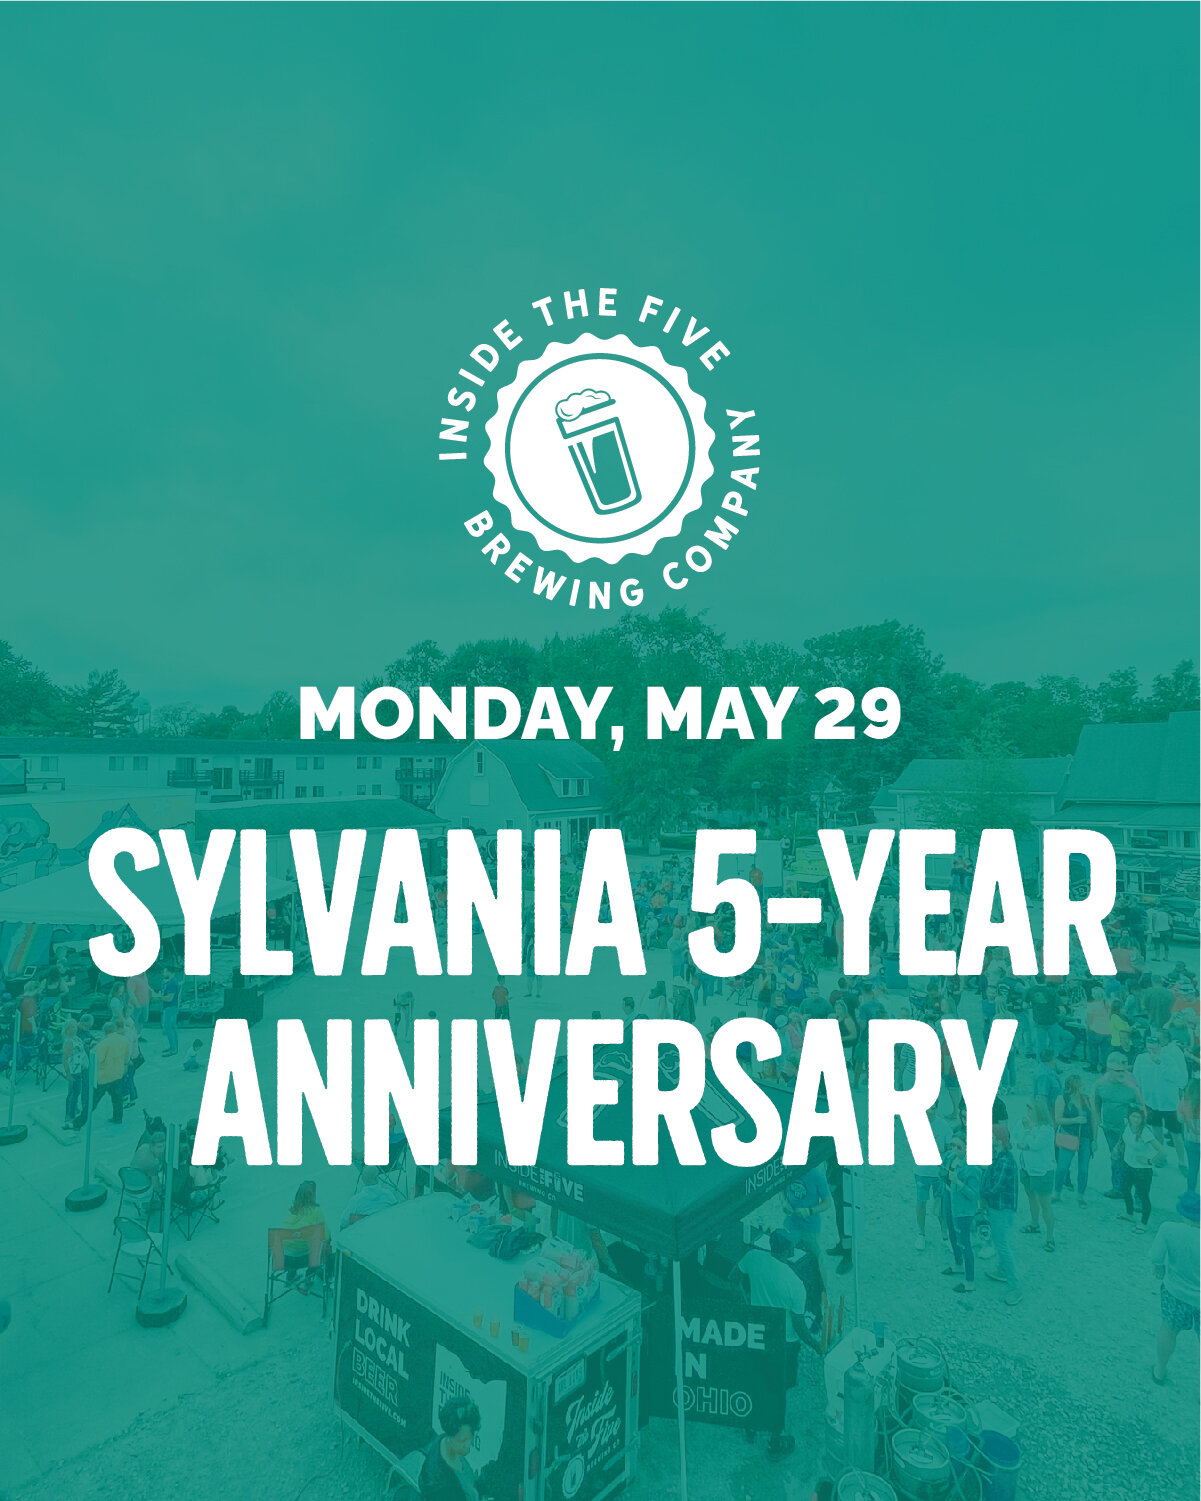 Our Memorial Day 5-Year Anniversary party is 2 weeks away in Sylvania.
Save the date = Monday, May 29th!

*MUSIC*
11am-1pm Angel Tipping
1-3pm Whitehead/Mac
3-5pm Echo Record
5-7pm Breaking Ground
7-10pm Distant Cousinz

*FOOD TRUCKS*
Wandering Bean 